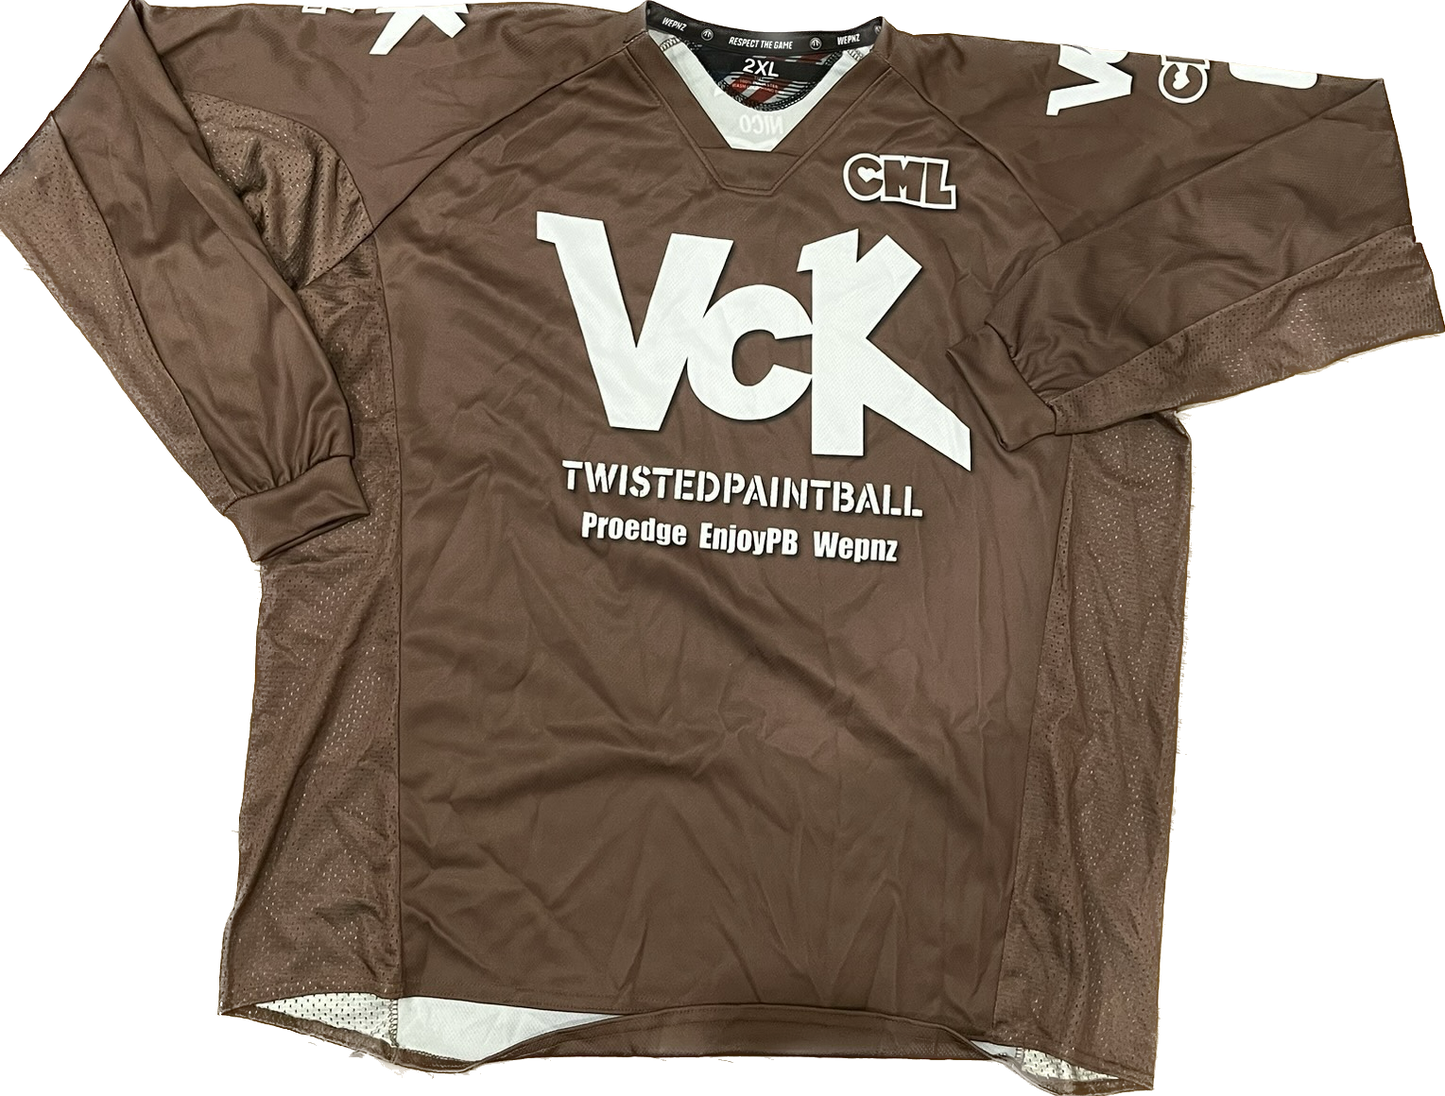 Nico Hyde -VcK- 2023 Jersey